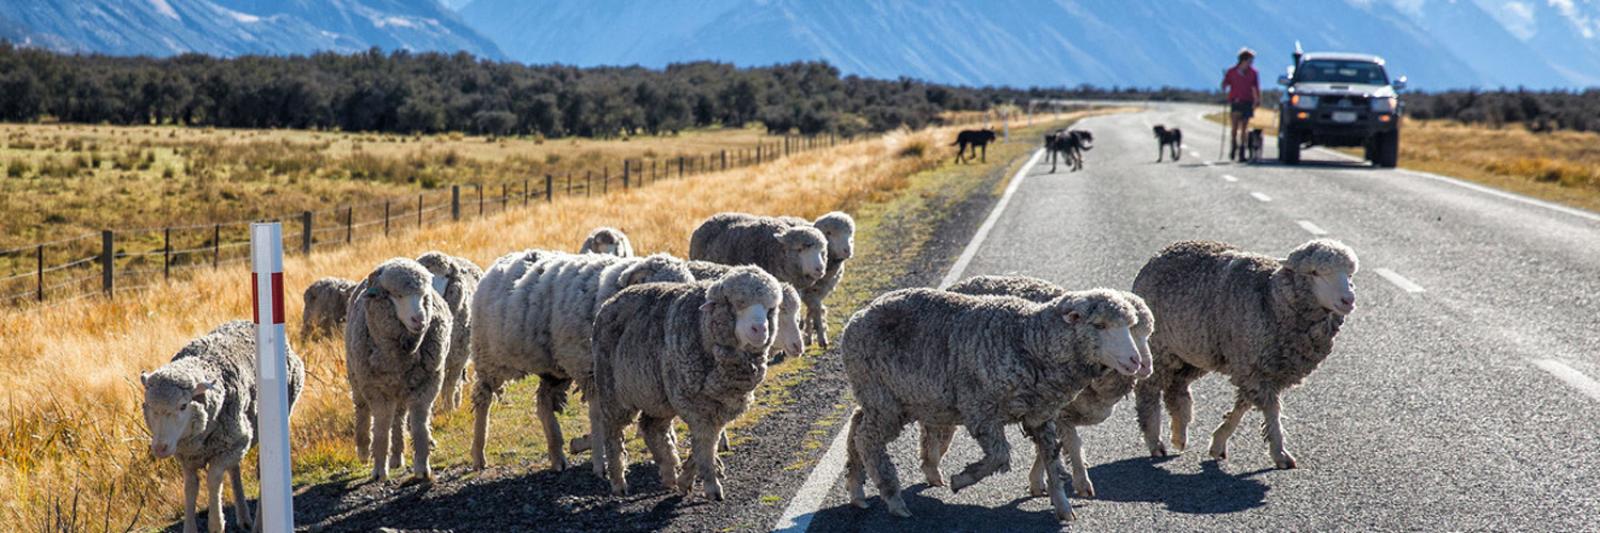 Sheep crossing road in New Zealand